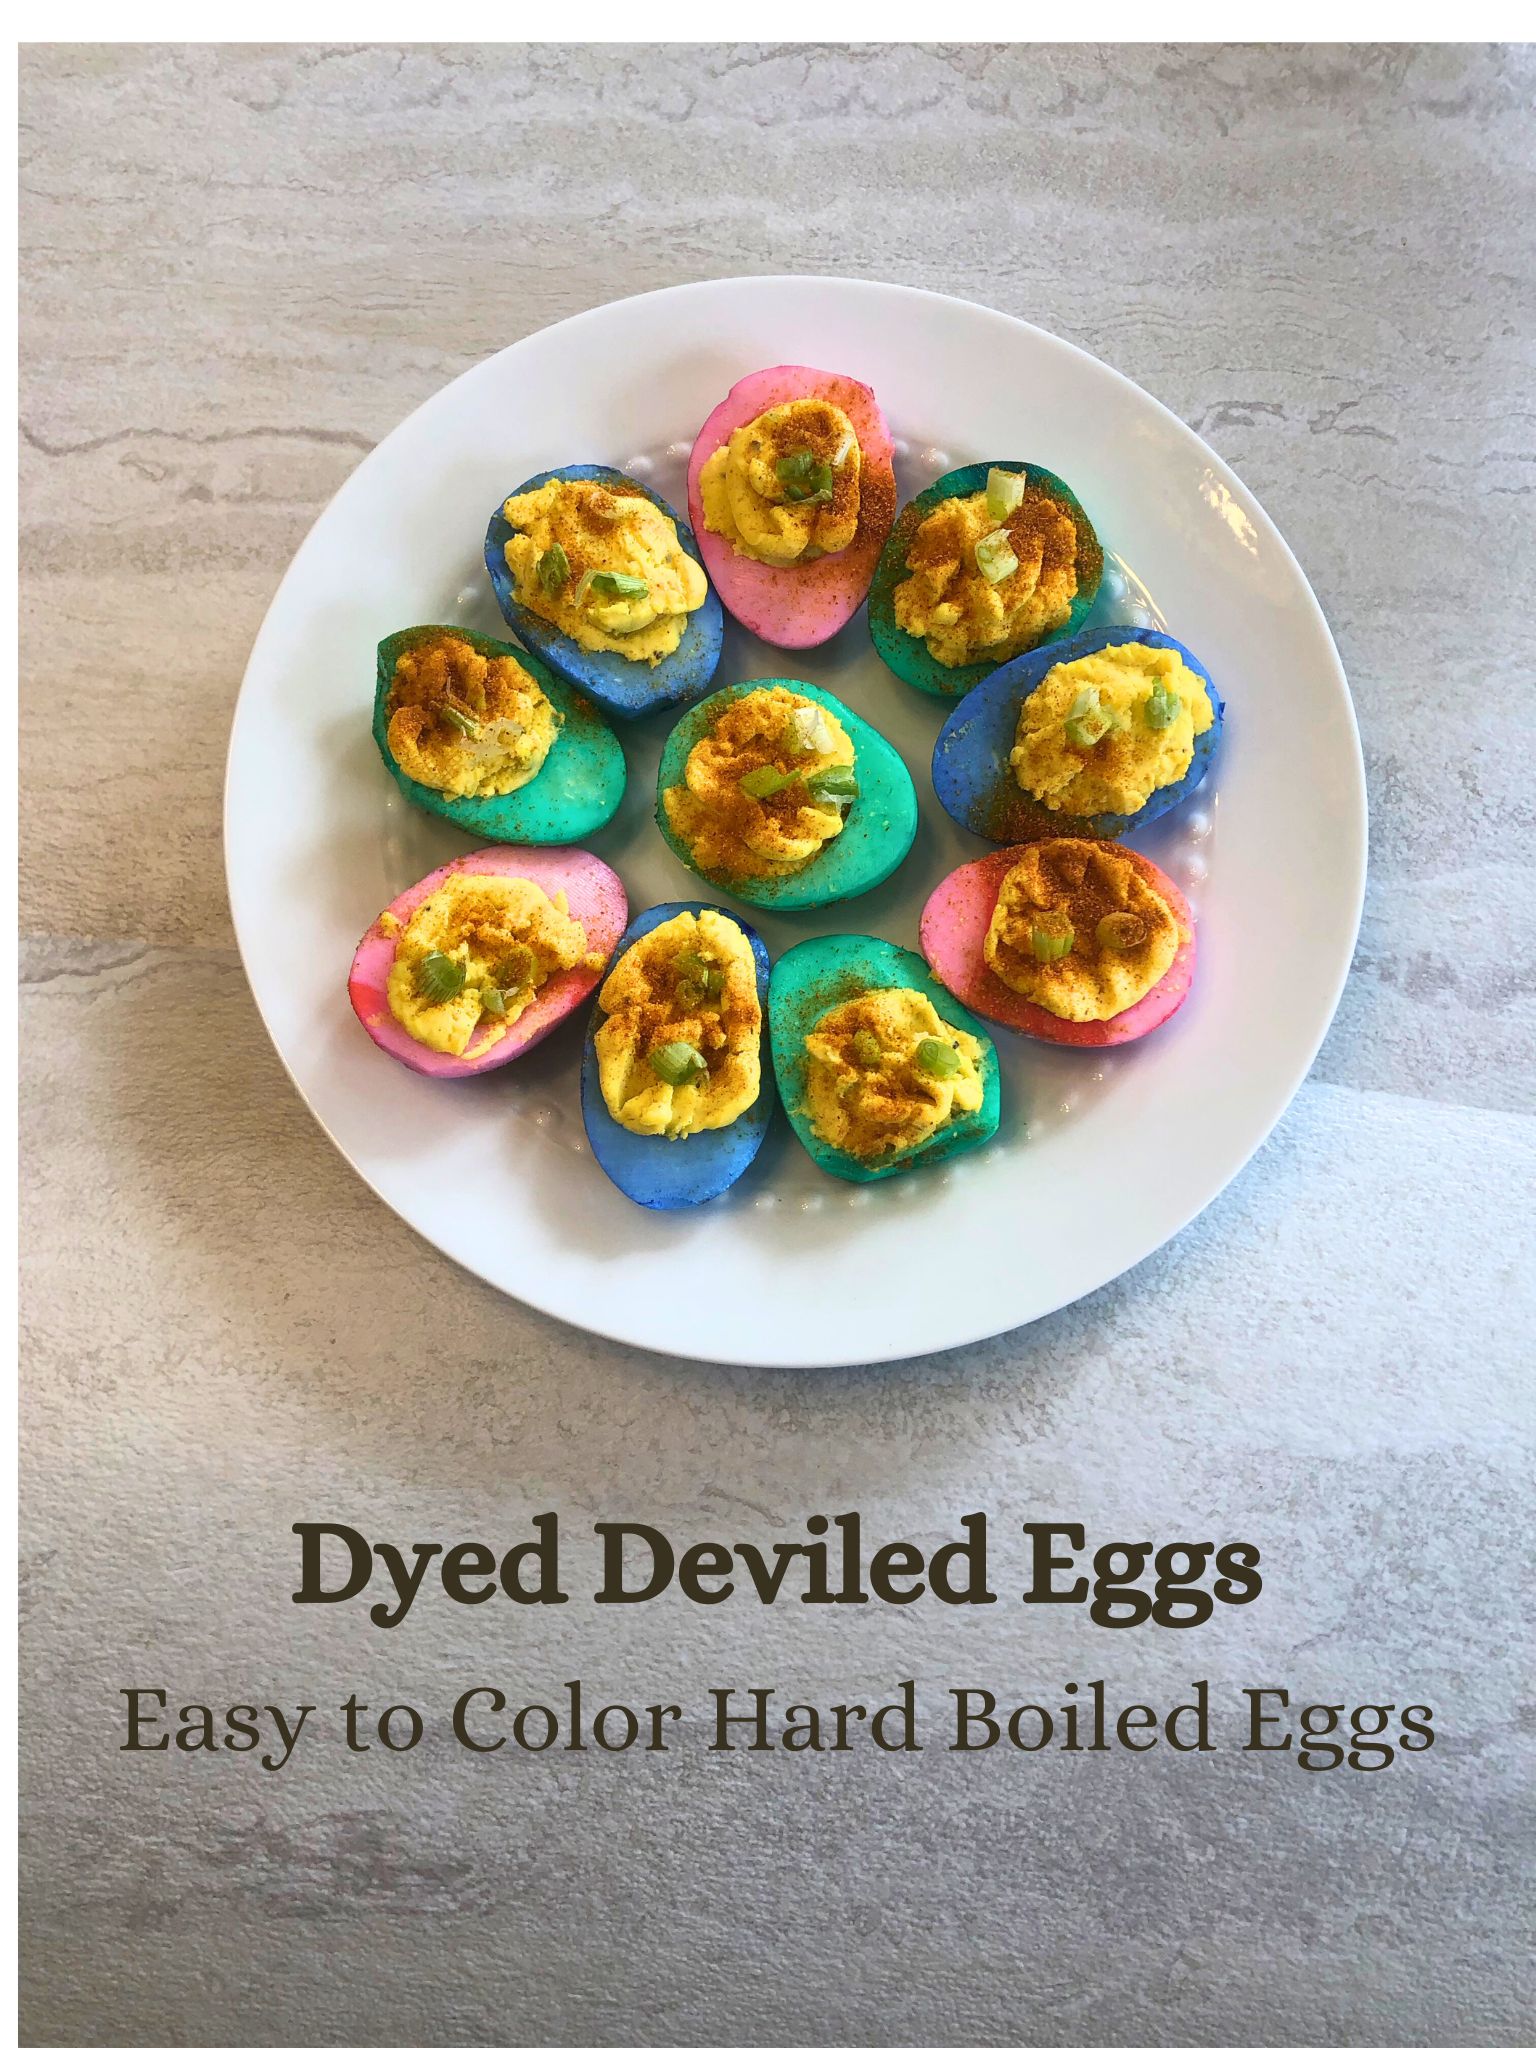 Tips and Tricks for Dyed Deviled Eggs (Easy to Color Hard Boiled Eggs)